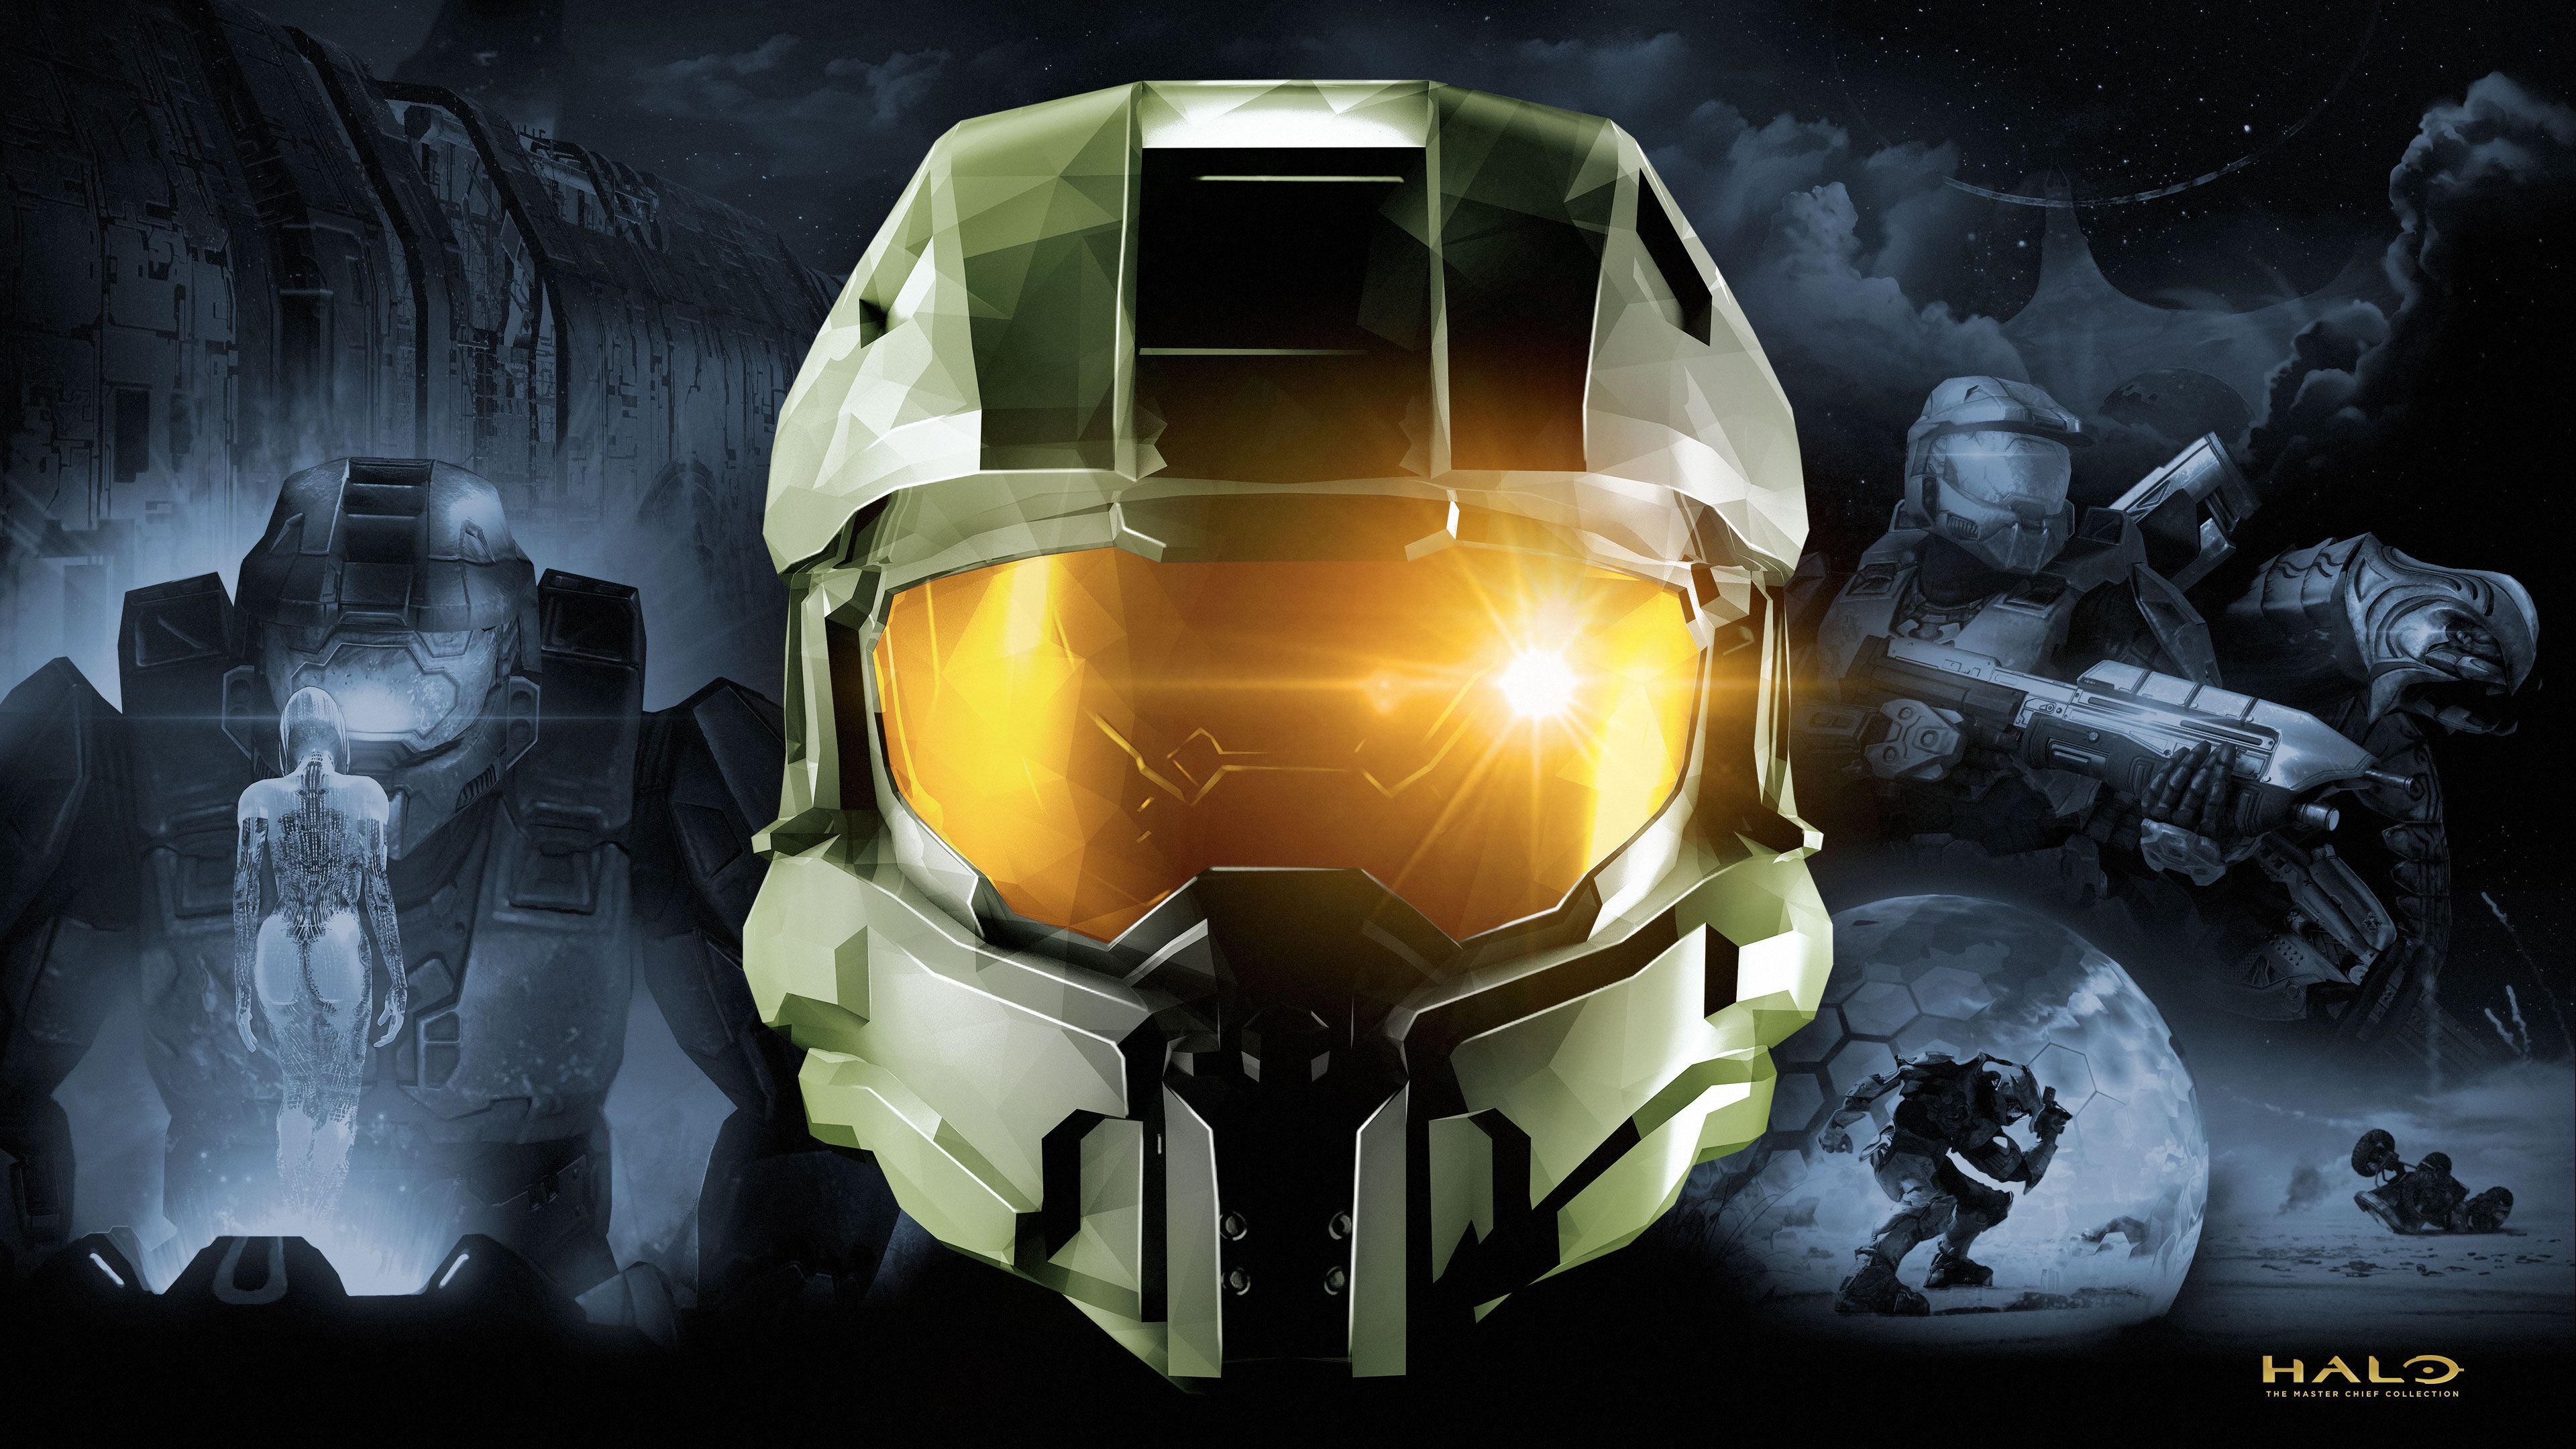 Halo The Master Chief Collection Wallpapers.